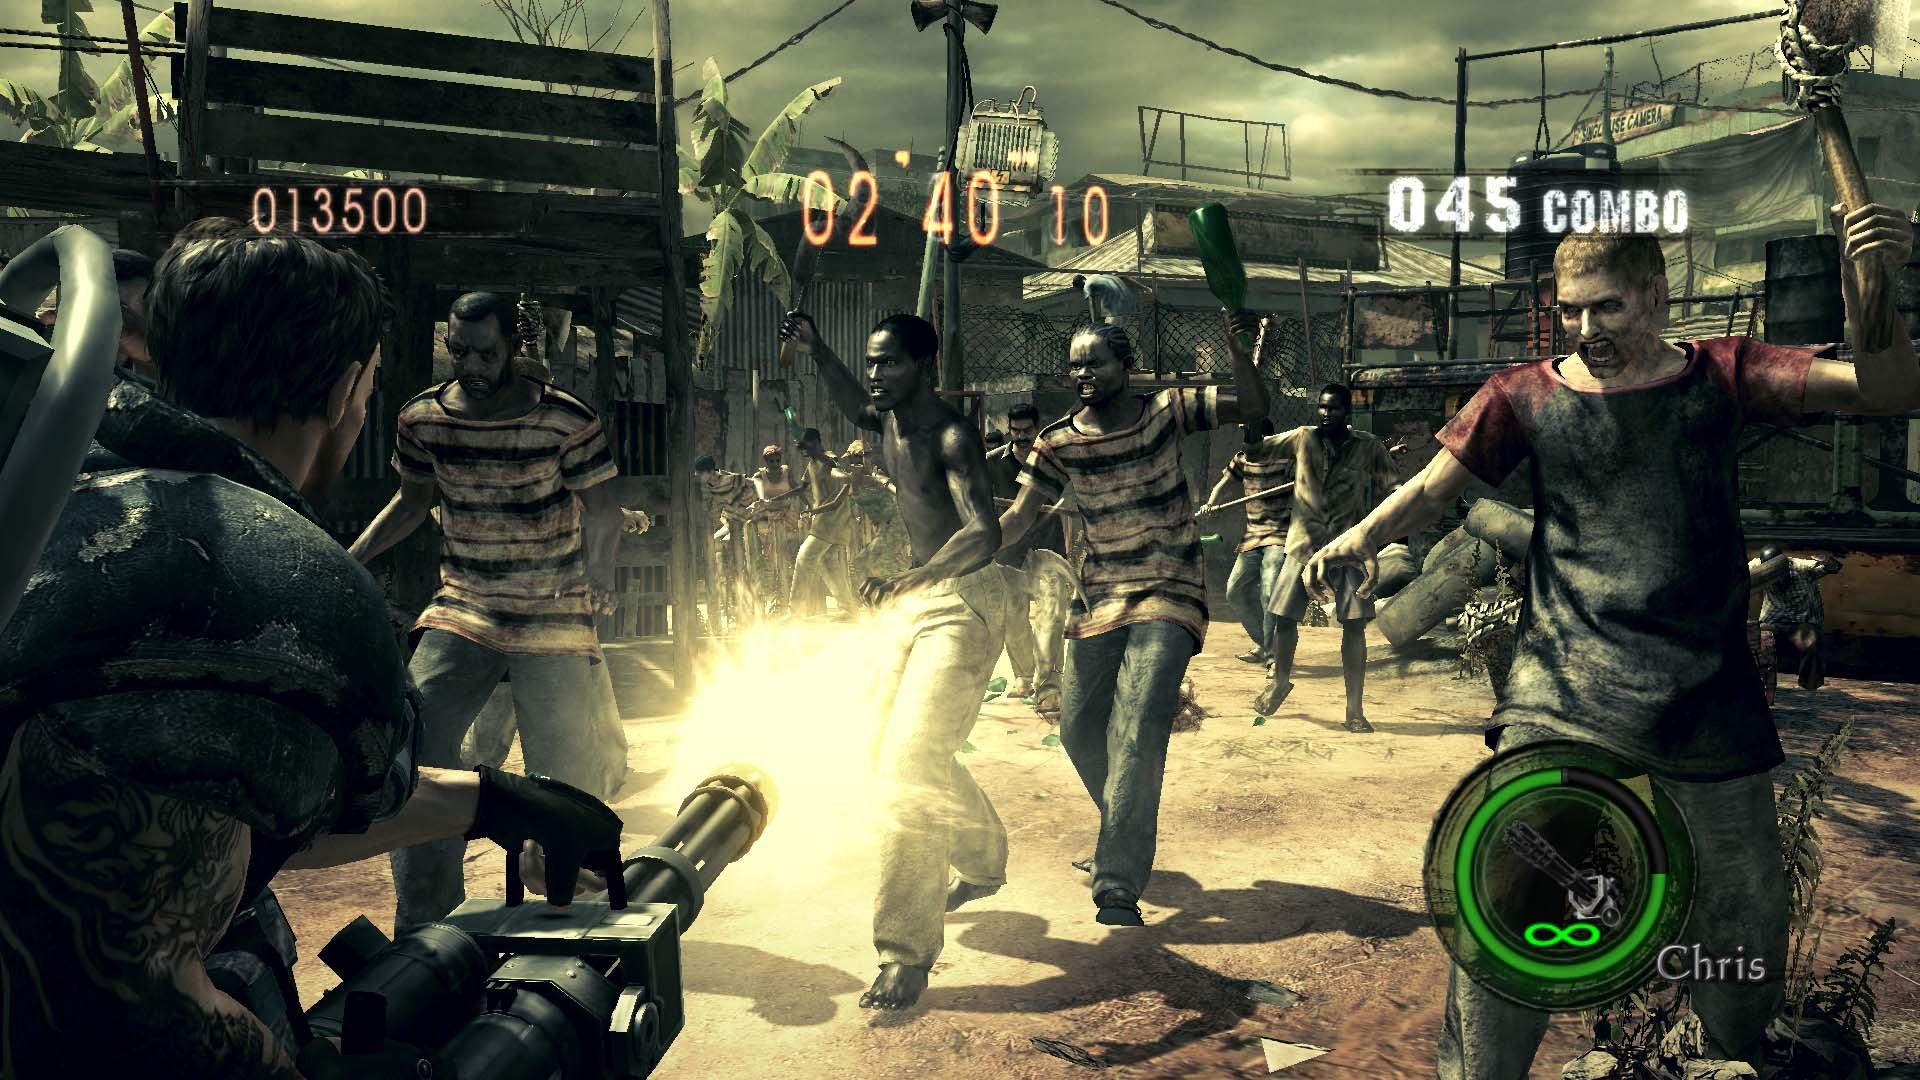 Resident Evil 5 for PS4, Xbox One arrives at the end of June - Polygon